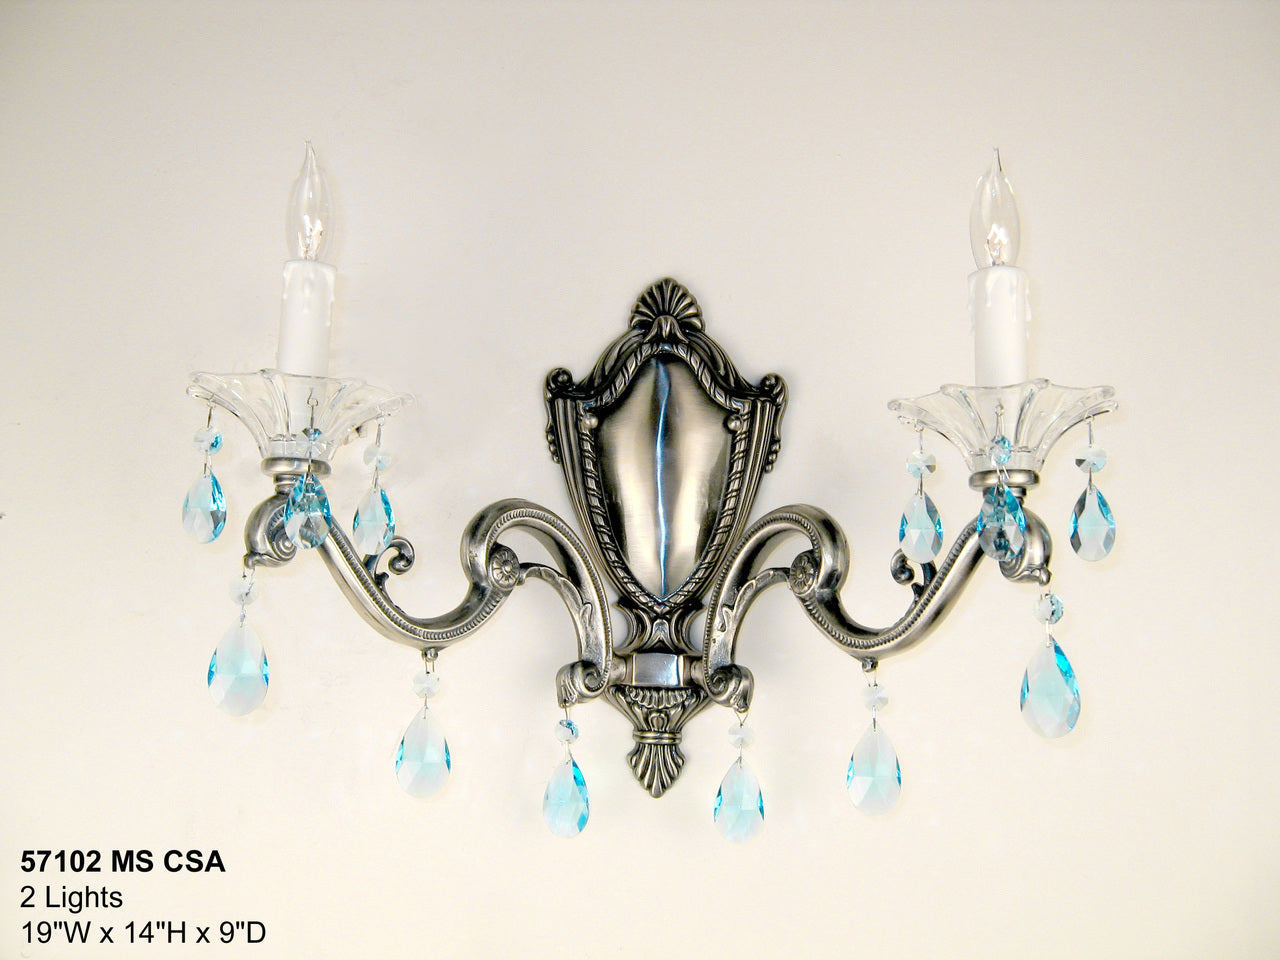 Classic Lighting 57102 MS CSA Via Firenze Crystal Wall Sconce in Millennium Silver (Imported from Spain)